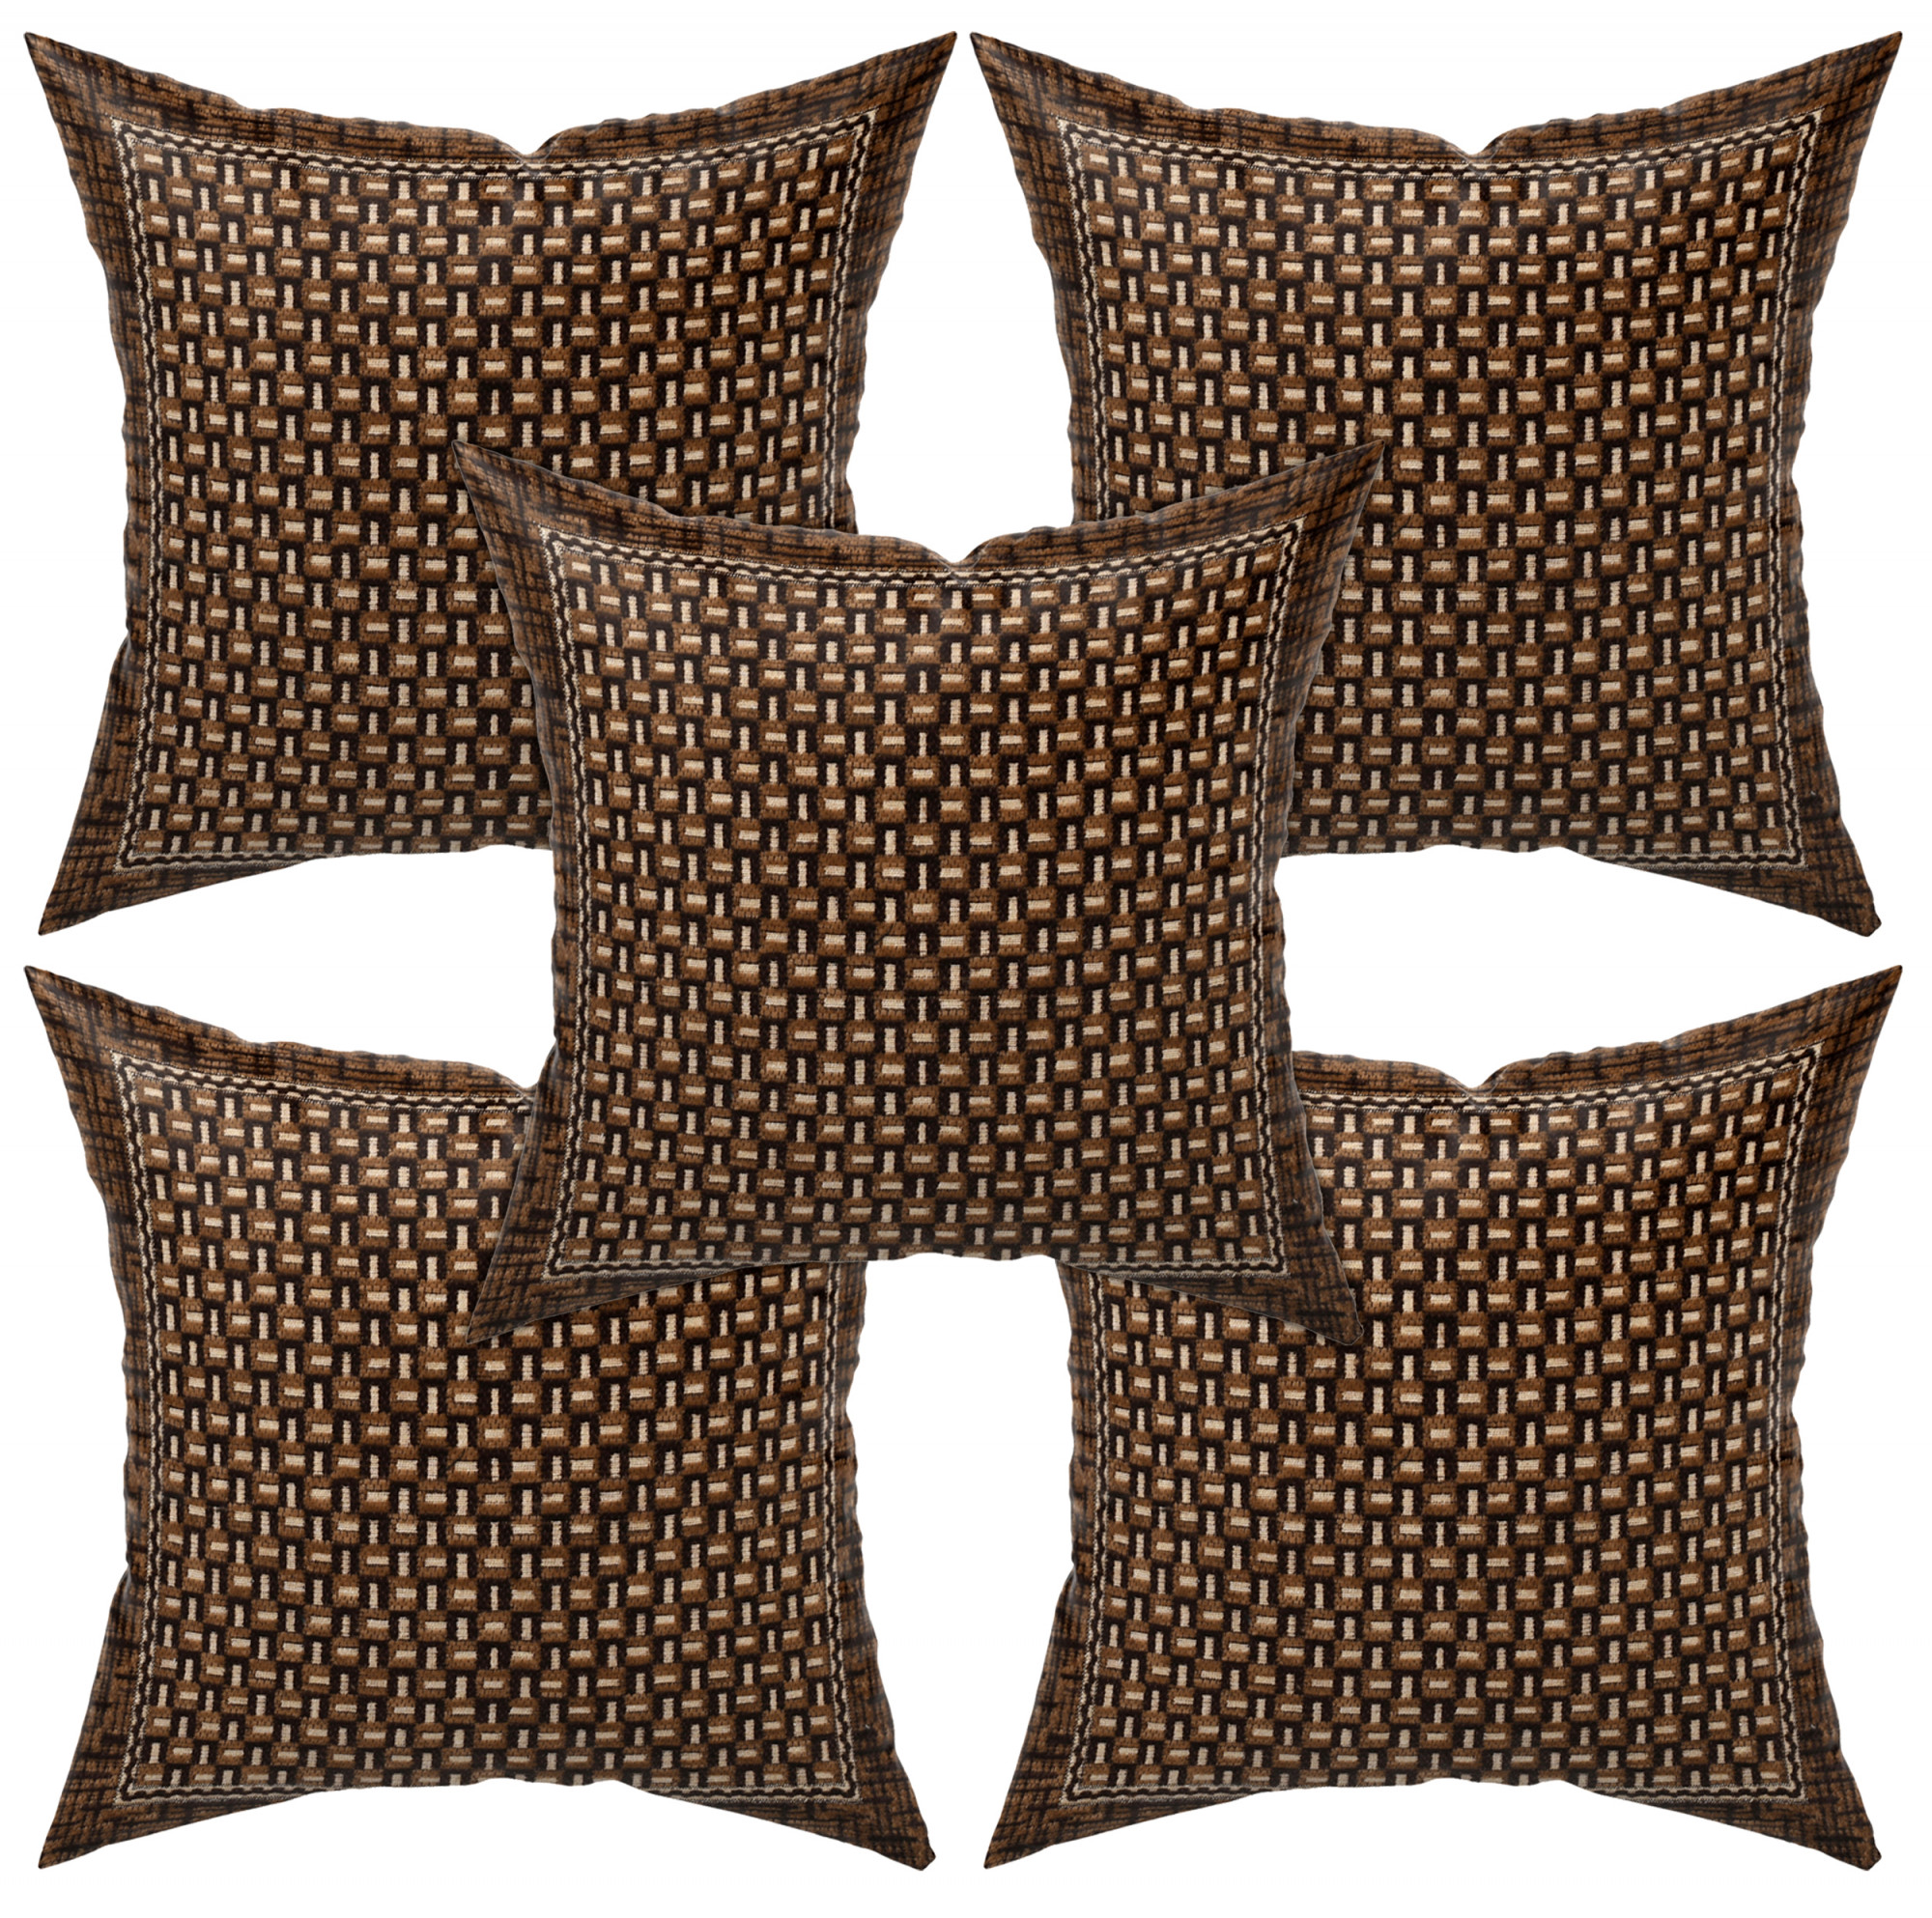 Kuber Industries Velvet Check Design Soft Decorative Square Throw Pillow Cover, Cushion Covers, Pillow Case For Sofa Couch Bed Chair 16x16 Inch-(Brown)